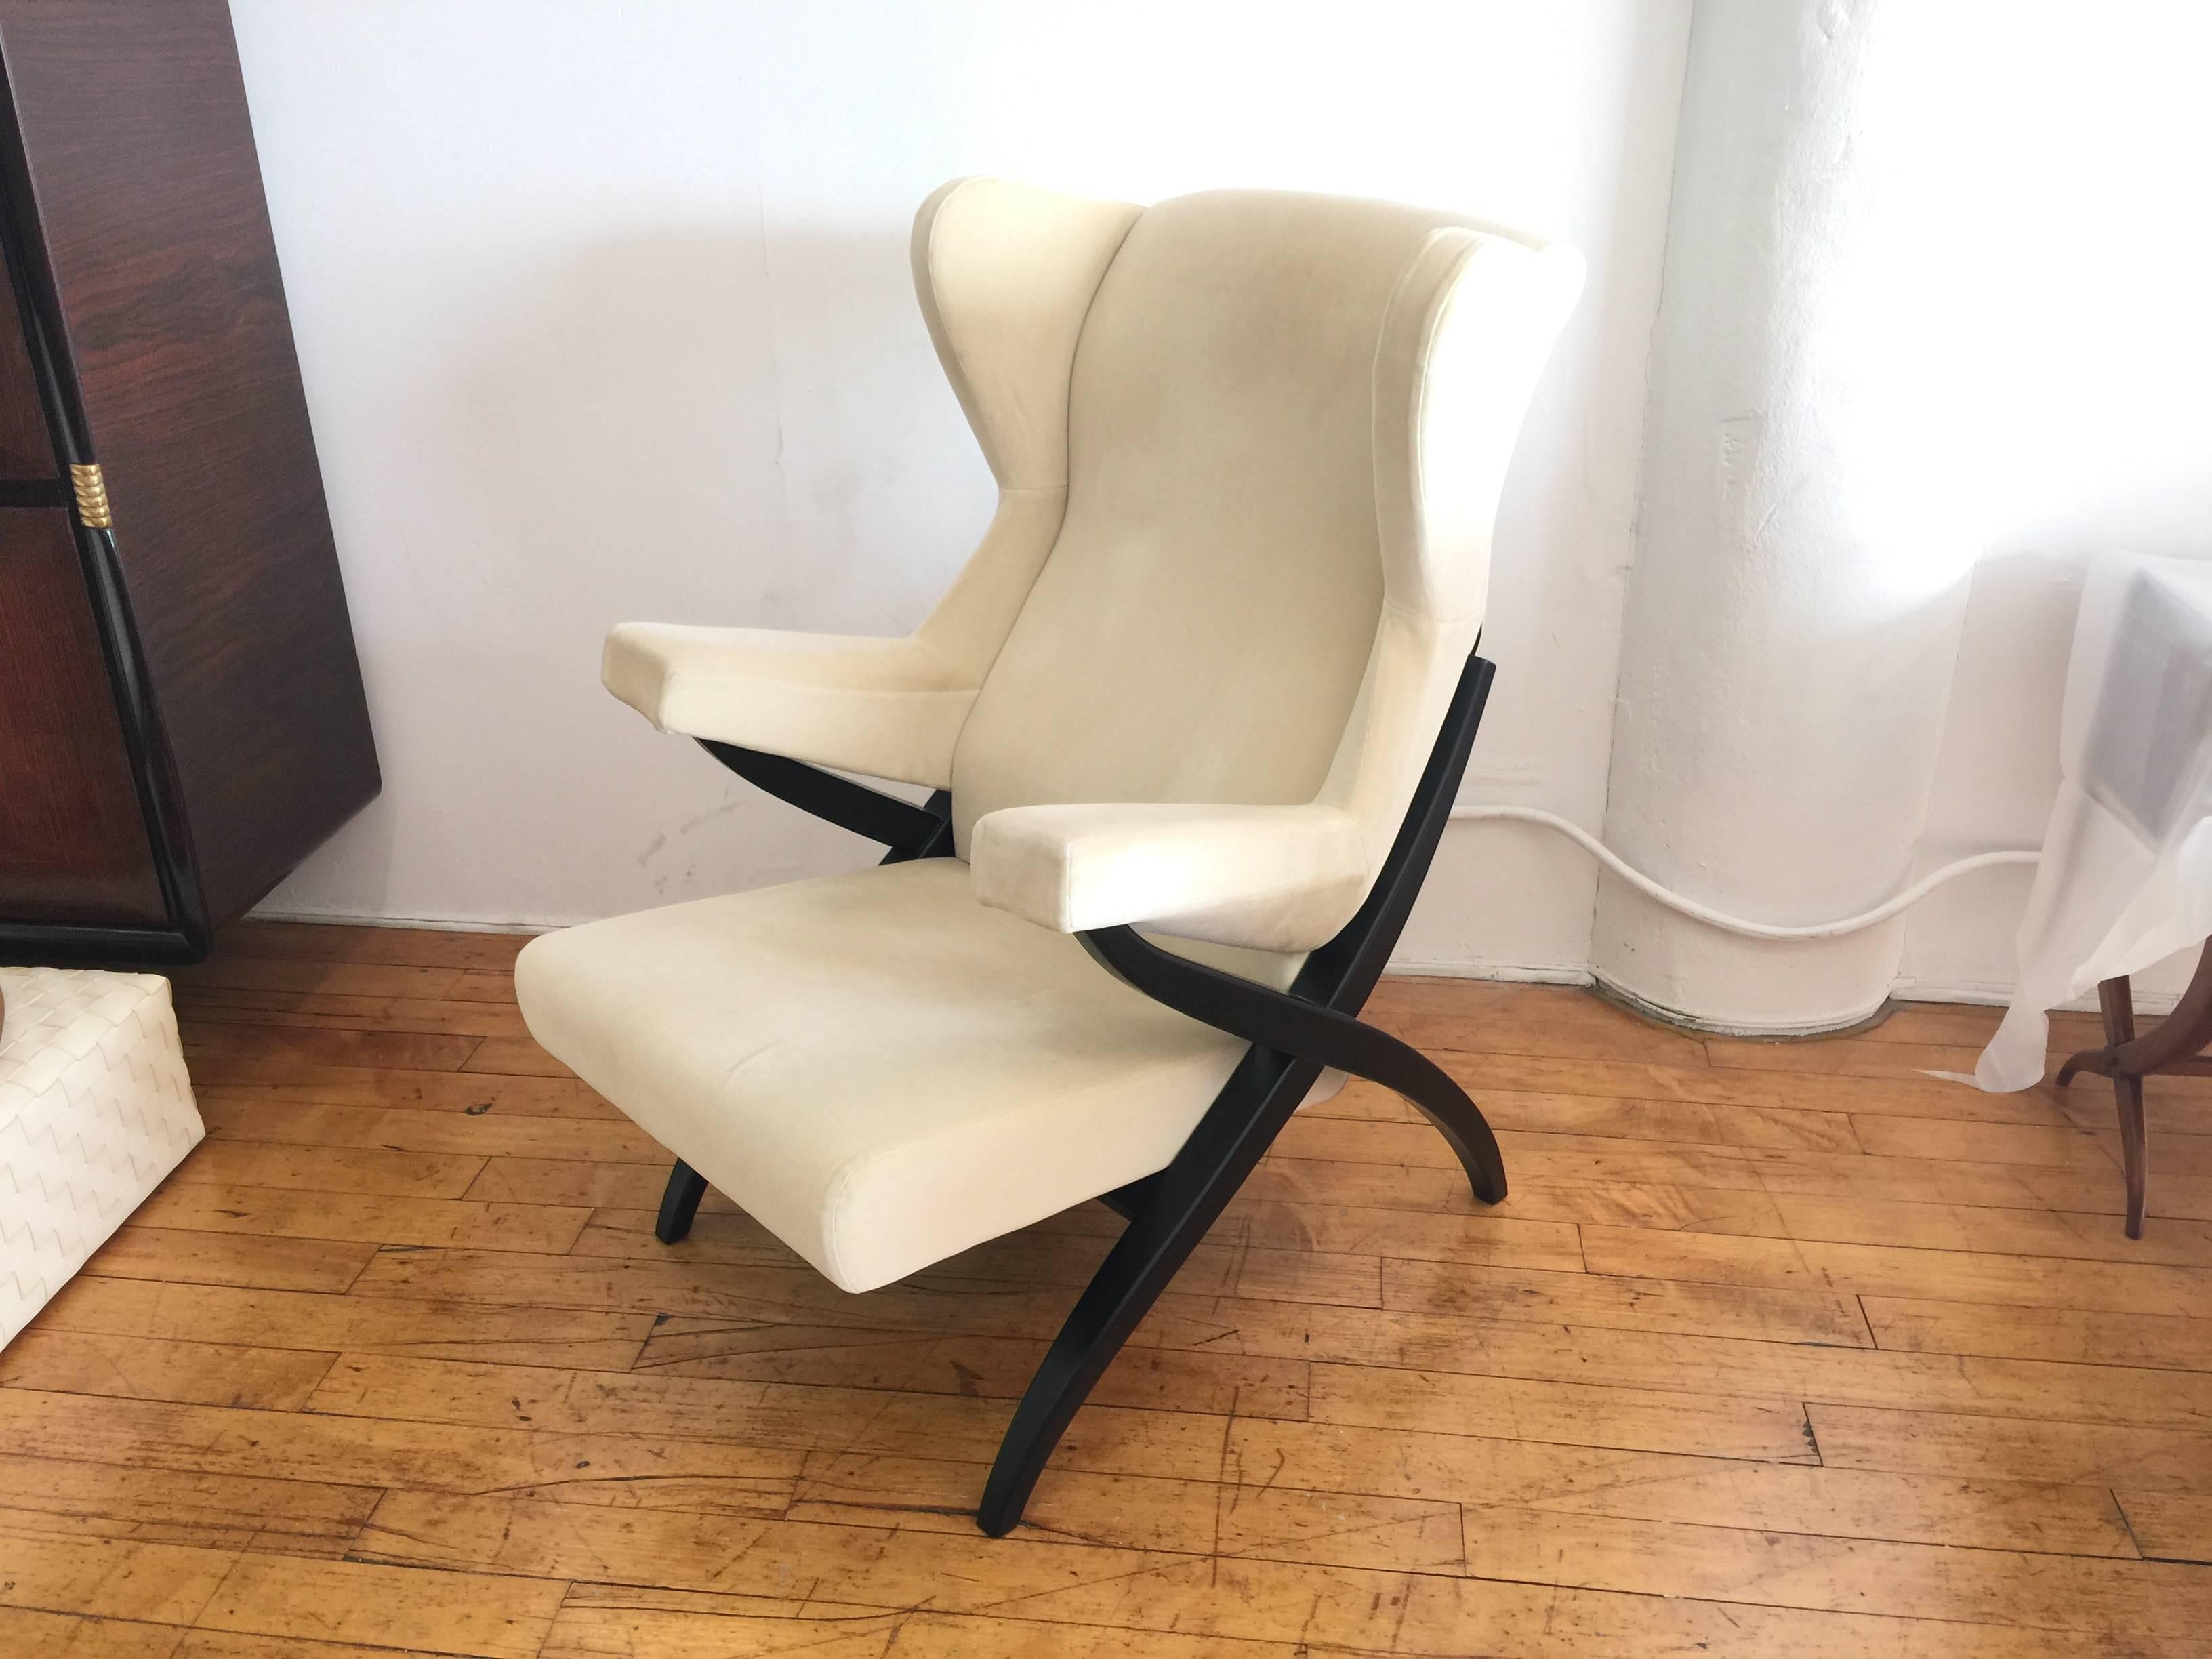 Fiorenza Italian lounge chairs designed by Franco Albini, upholstered in beige cotton velvet, manufactured by Arflex. The retail price for this comfortable Italian designer lounge chair is over 6,000$ today. This chair is circa 2010 so it is still